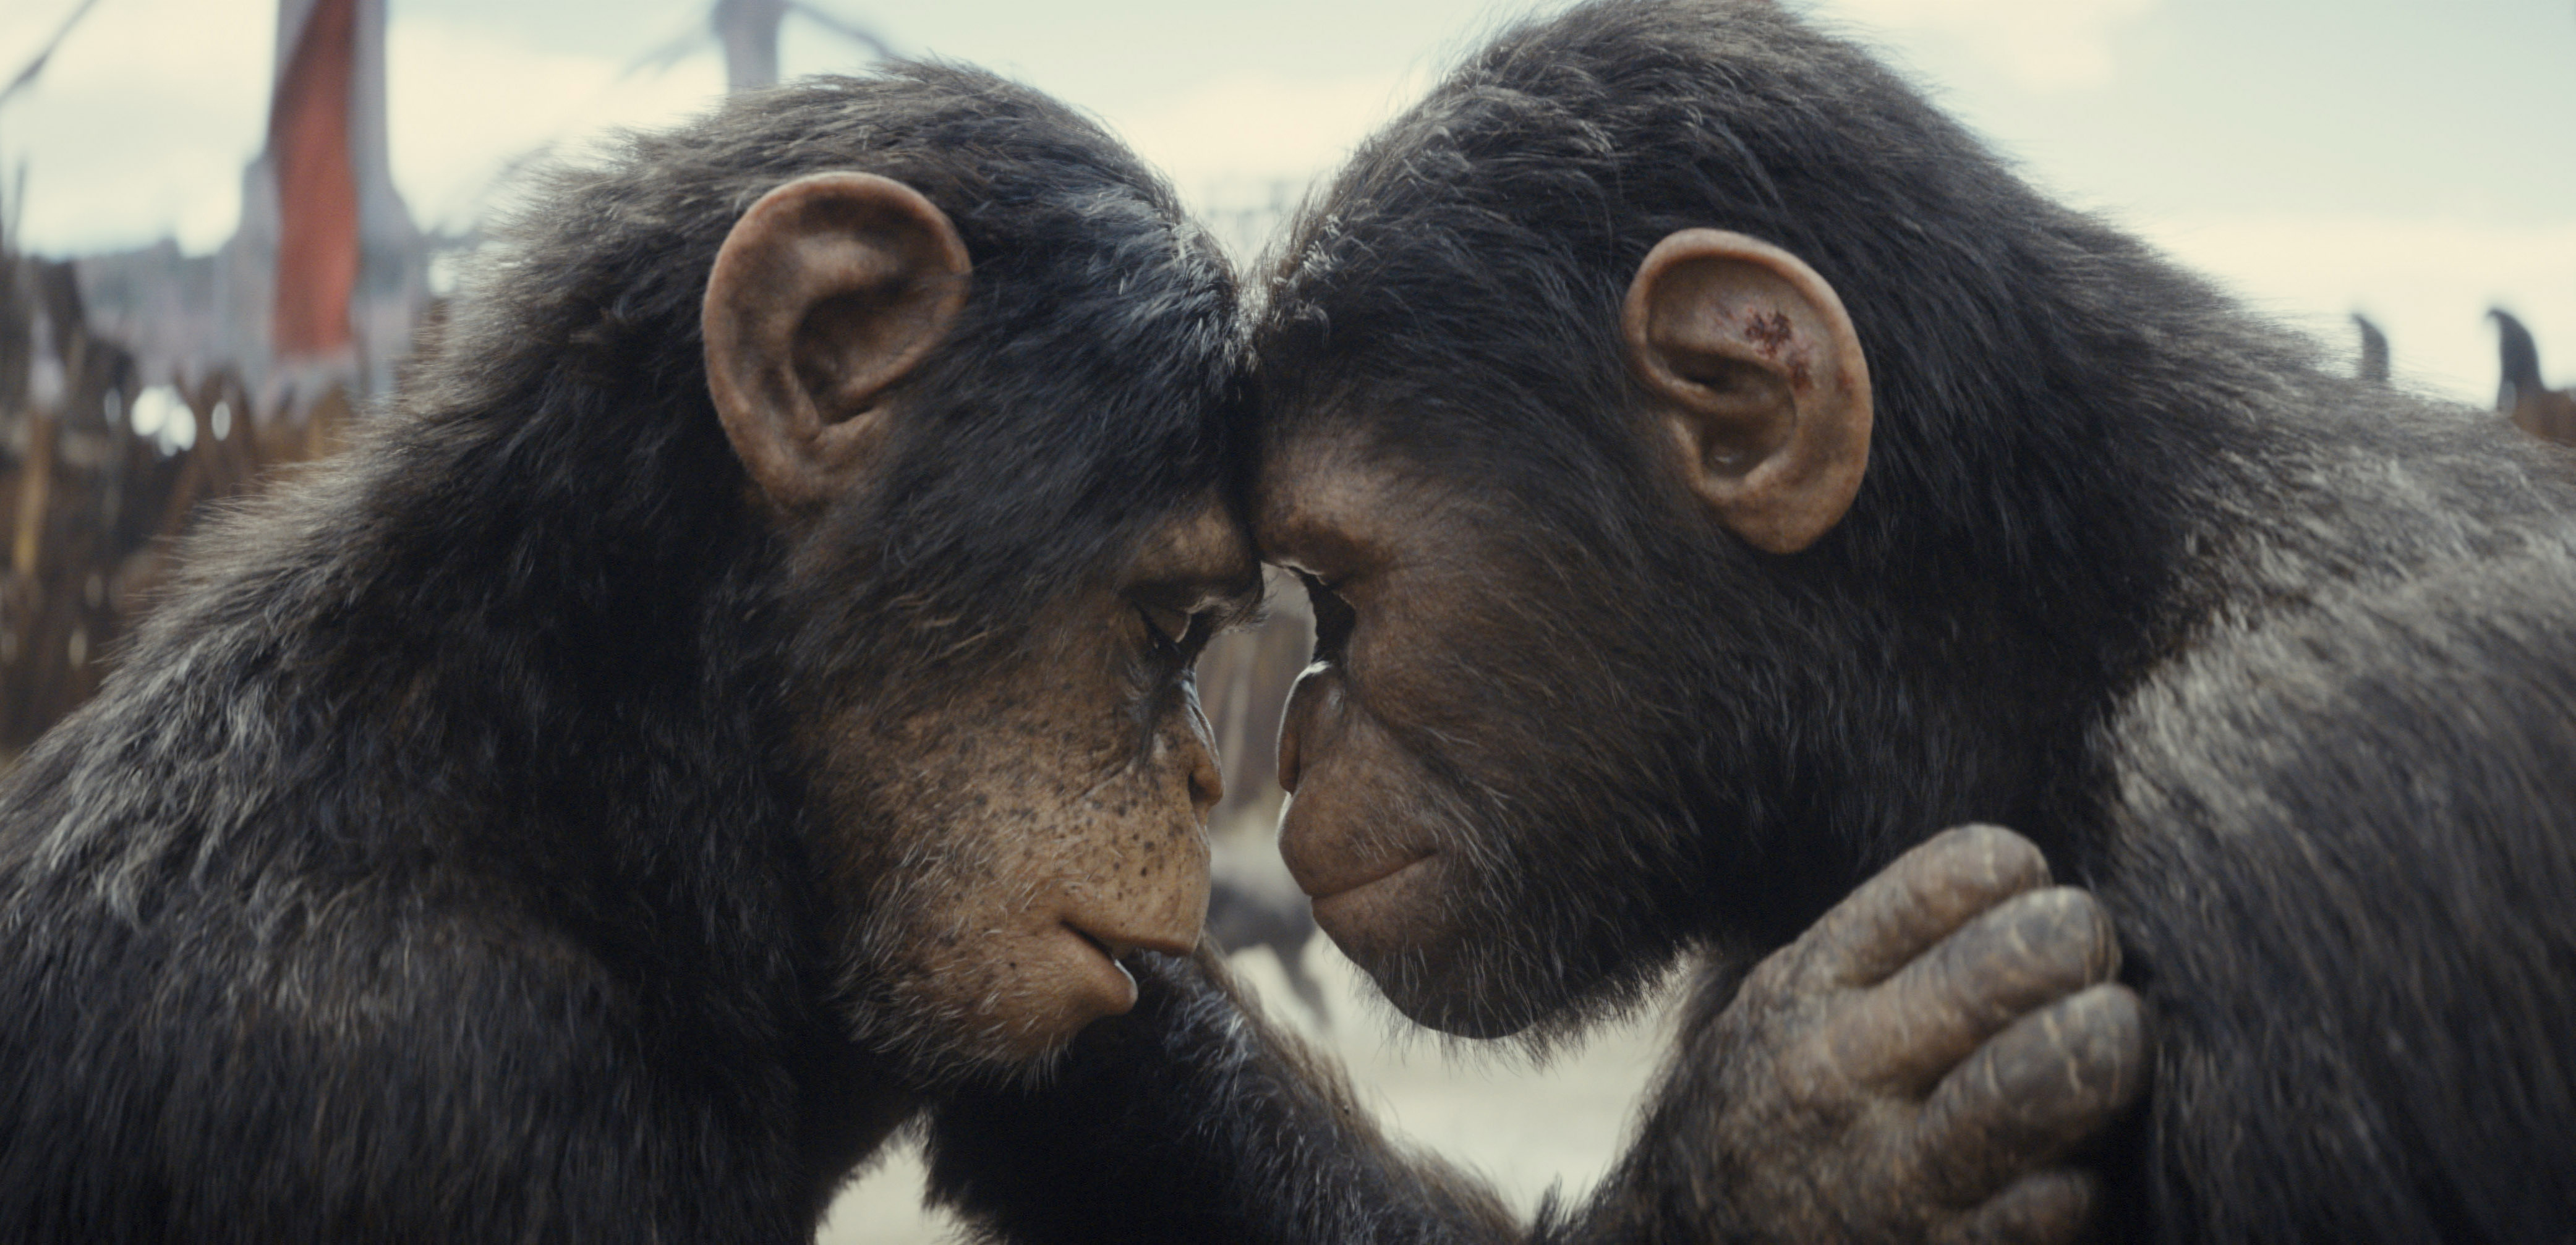 Kingdom Of The Planet Of The Apes has lifelike simians but lacks humanity